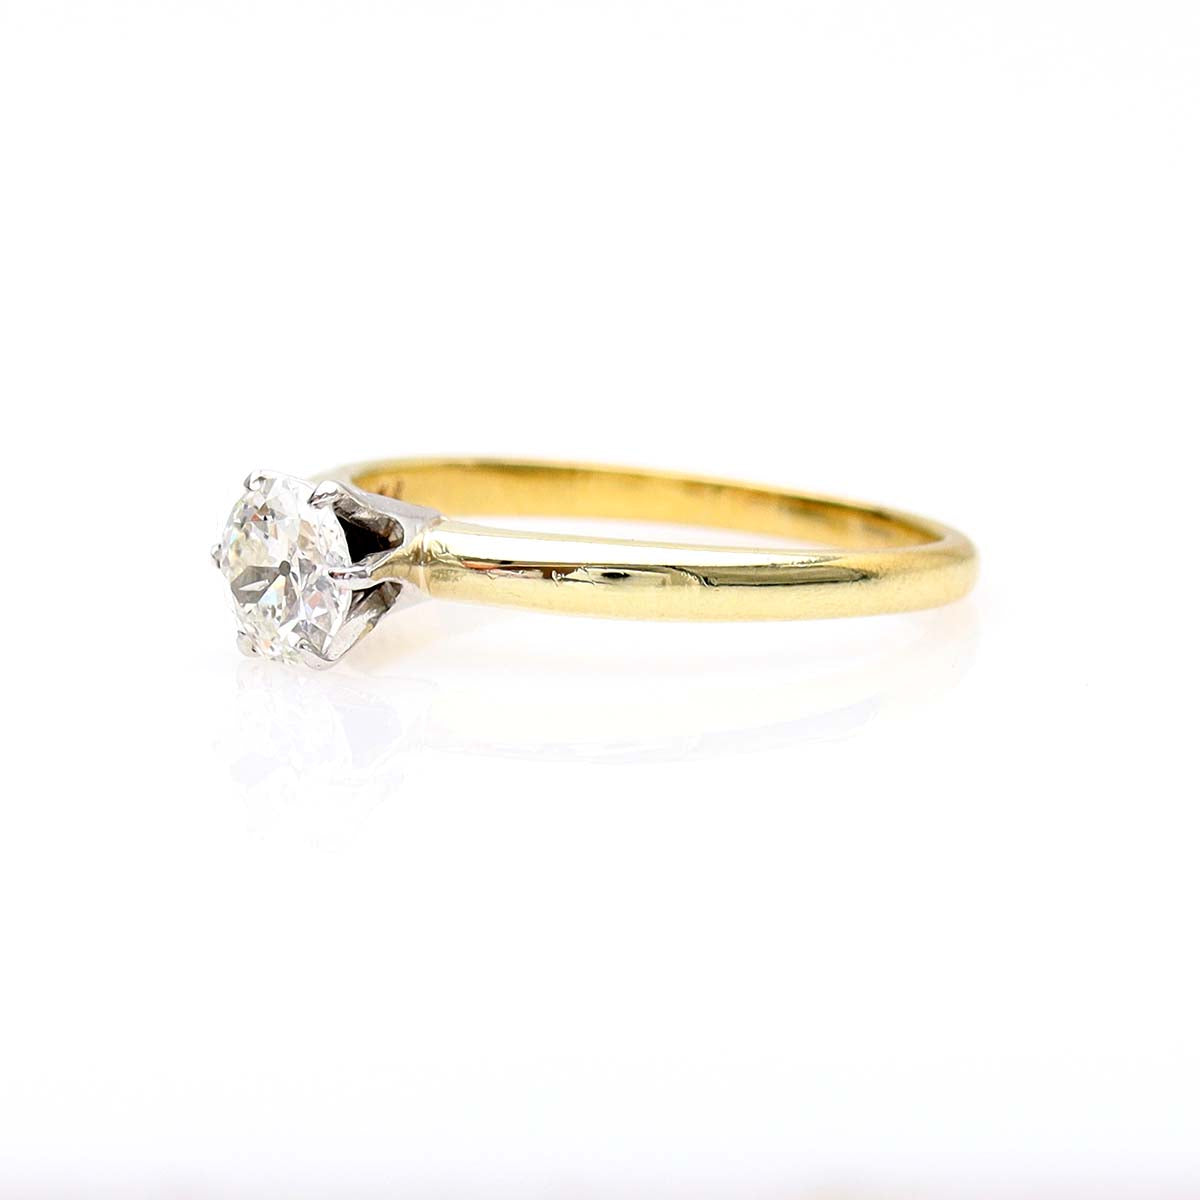 Early 1900s Old European Cut Diamond engagement ring #VR230516-3